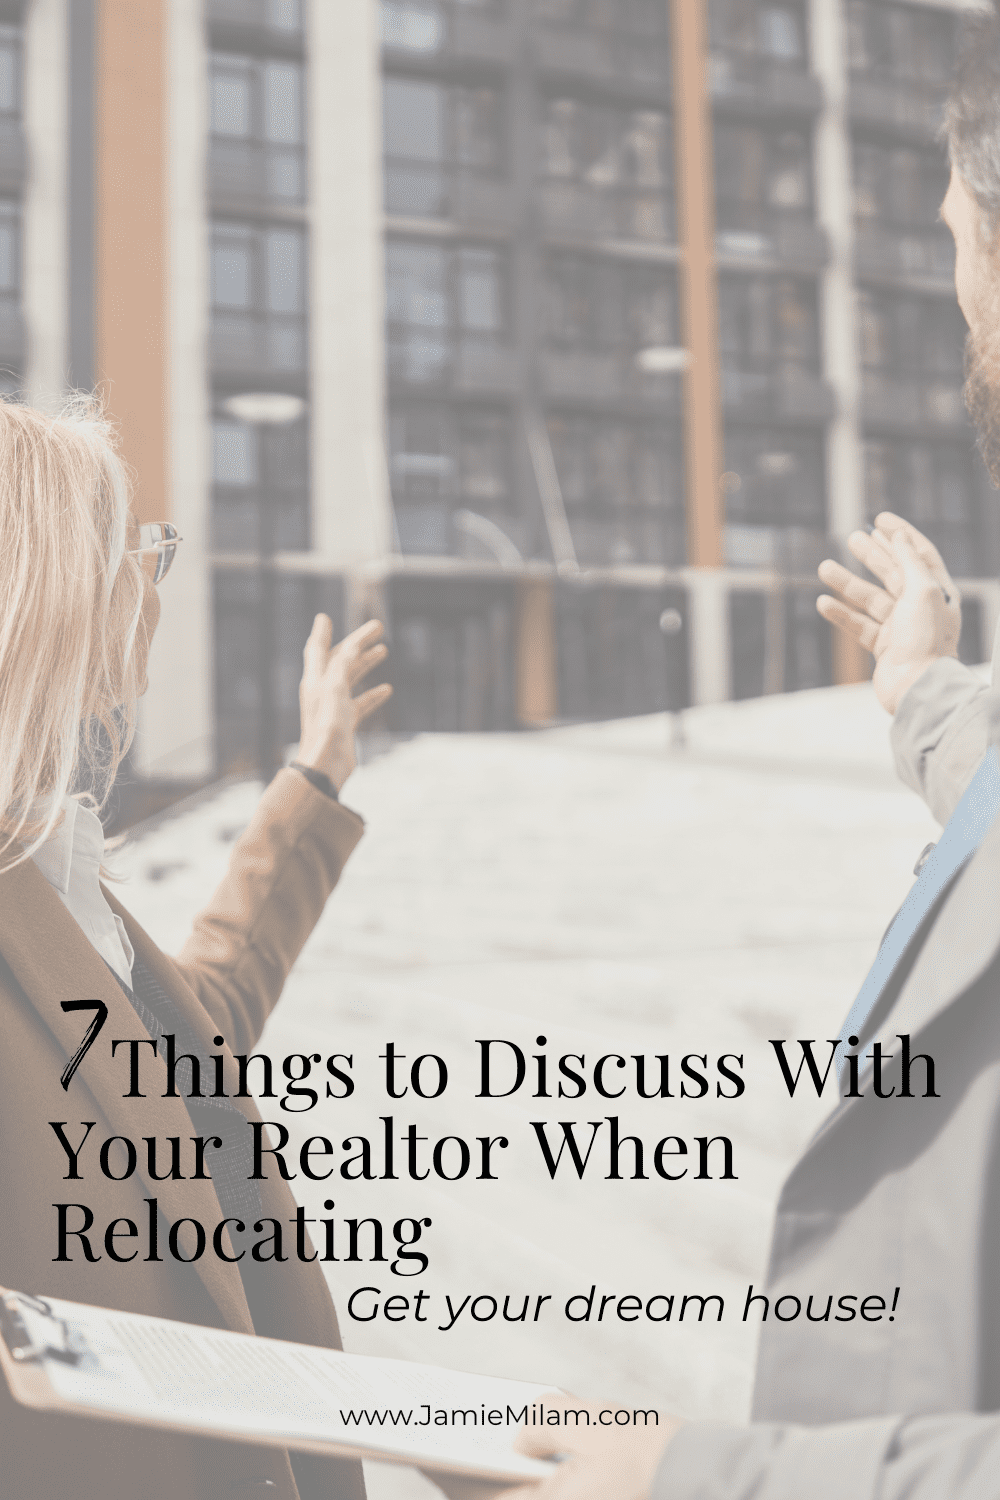 Image of two people pointing to a house with the text "7 things to discuss with your realtor when relocating"